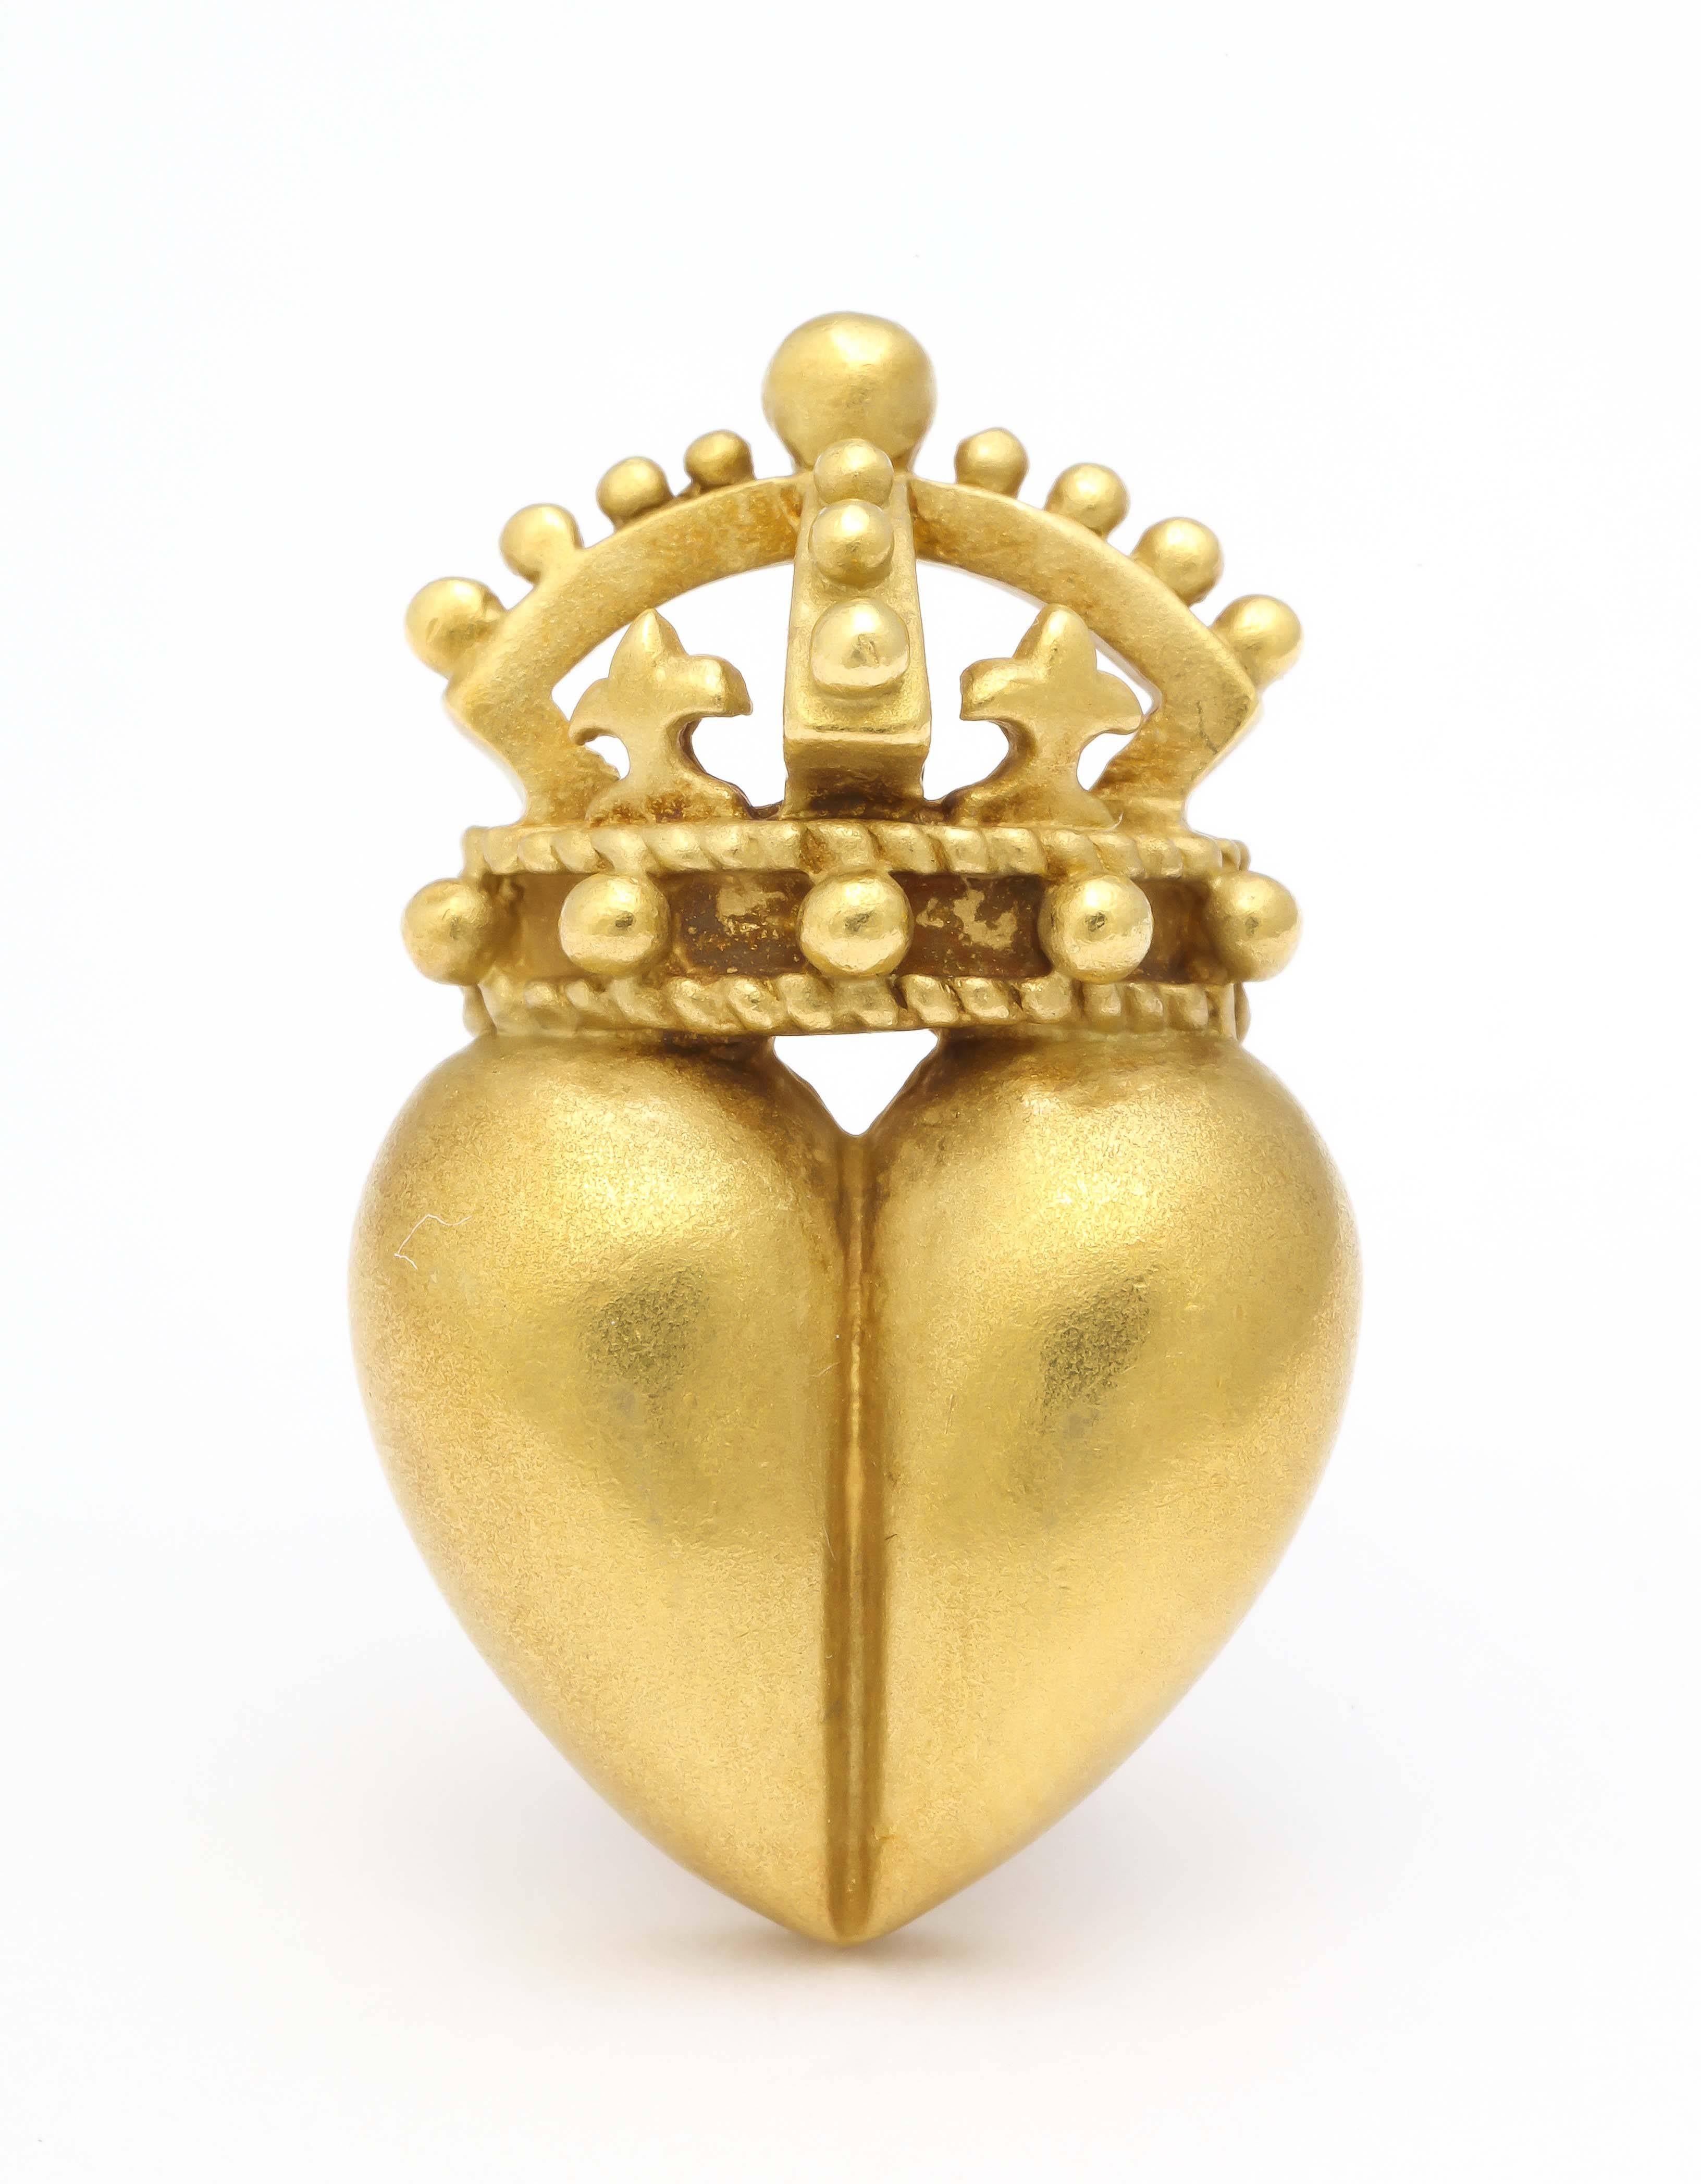 Kieselstein -Cord signature heart and crown earrings in acid washed 18k gold.
one inch by 3/4 inch
